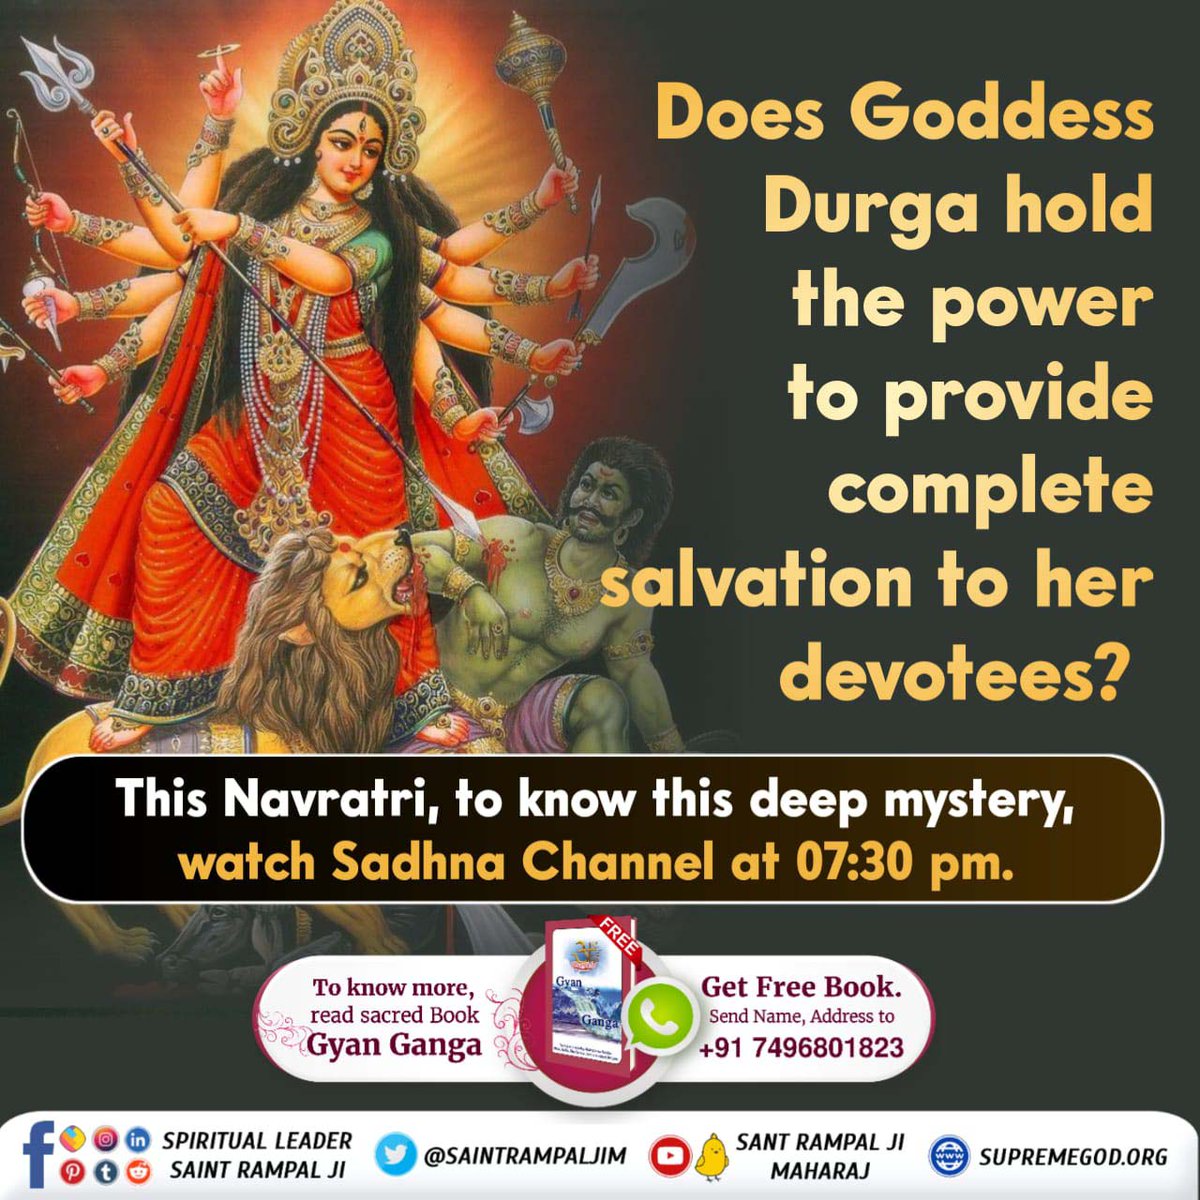 To get benefit from durga ji we need to please her by chanting true mantras of durga ji. To know about her true mantras must listen to the sermons of sant rampal ji maharaj on satlok Ashram YouTube▶️ channel. 🎶🙏🏻⬇️ #माँ_को_खुश_करनेकेलिए पढ़ें ज्ञान गंगा